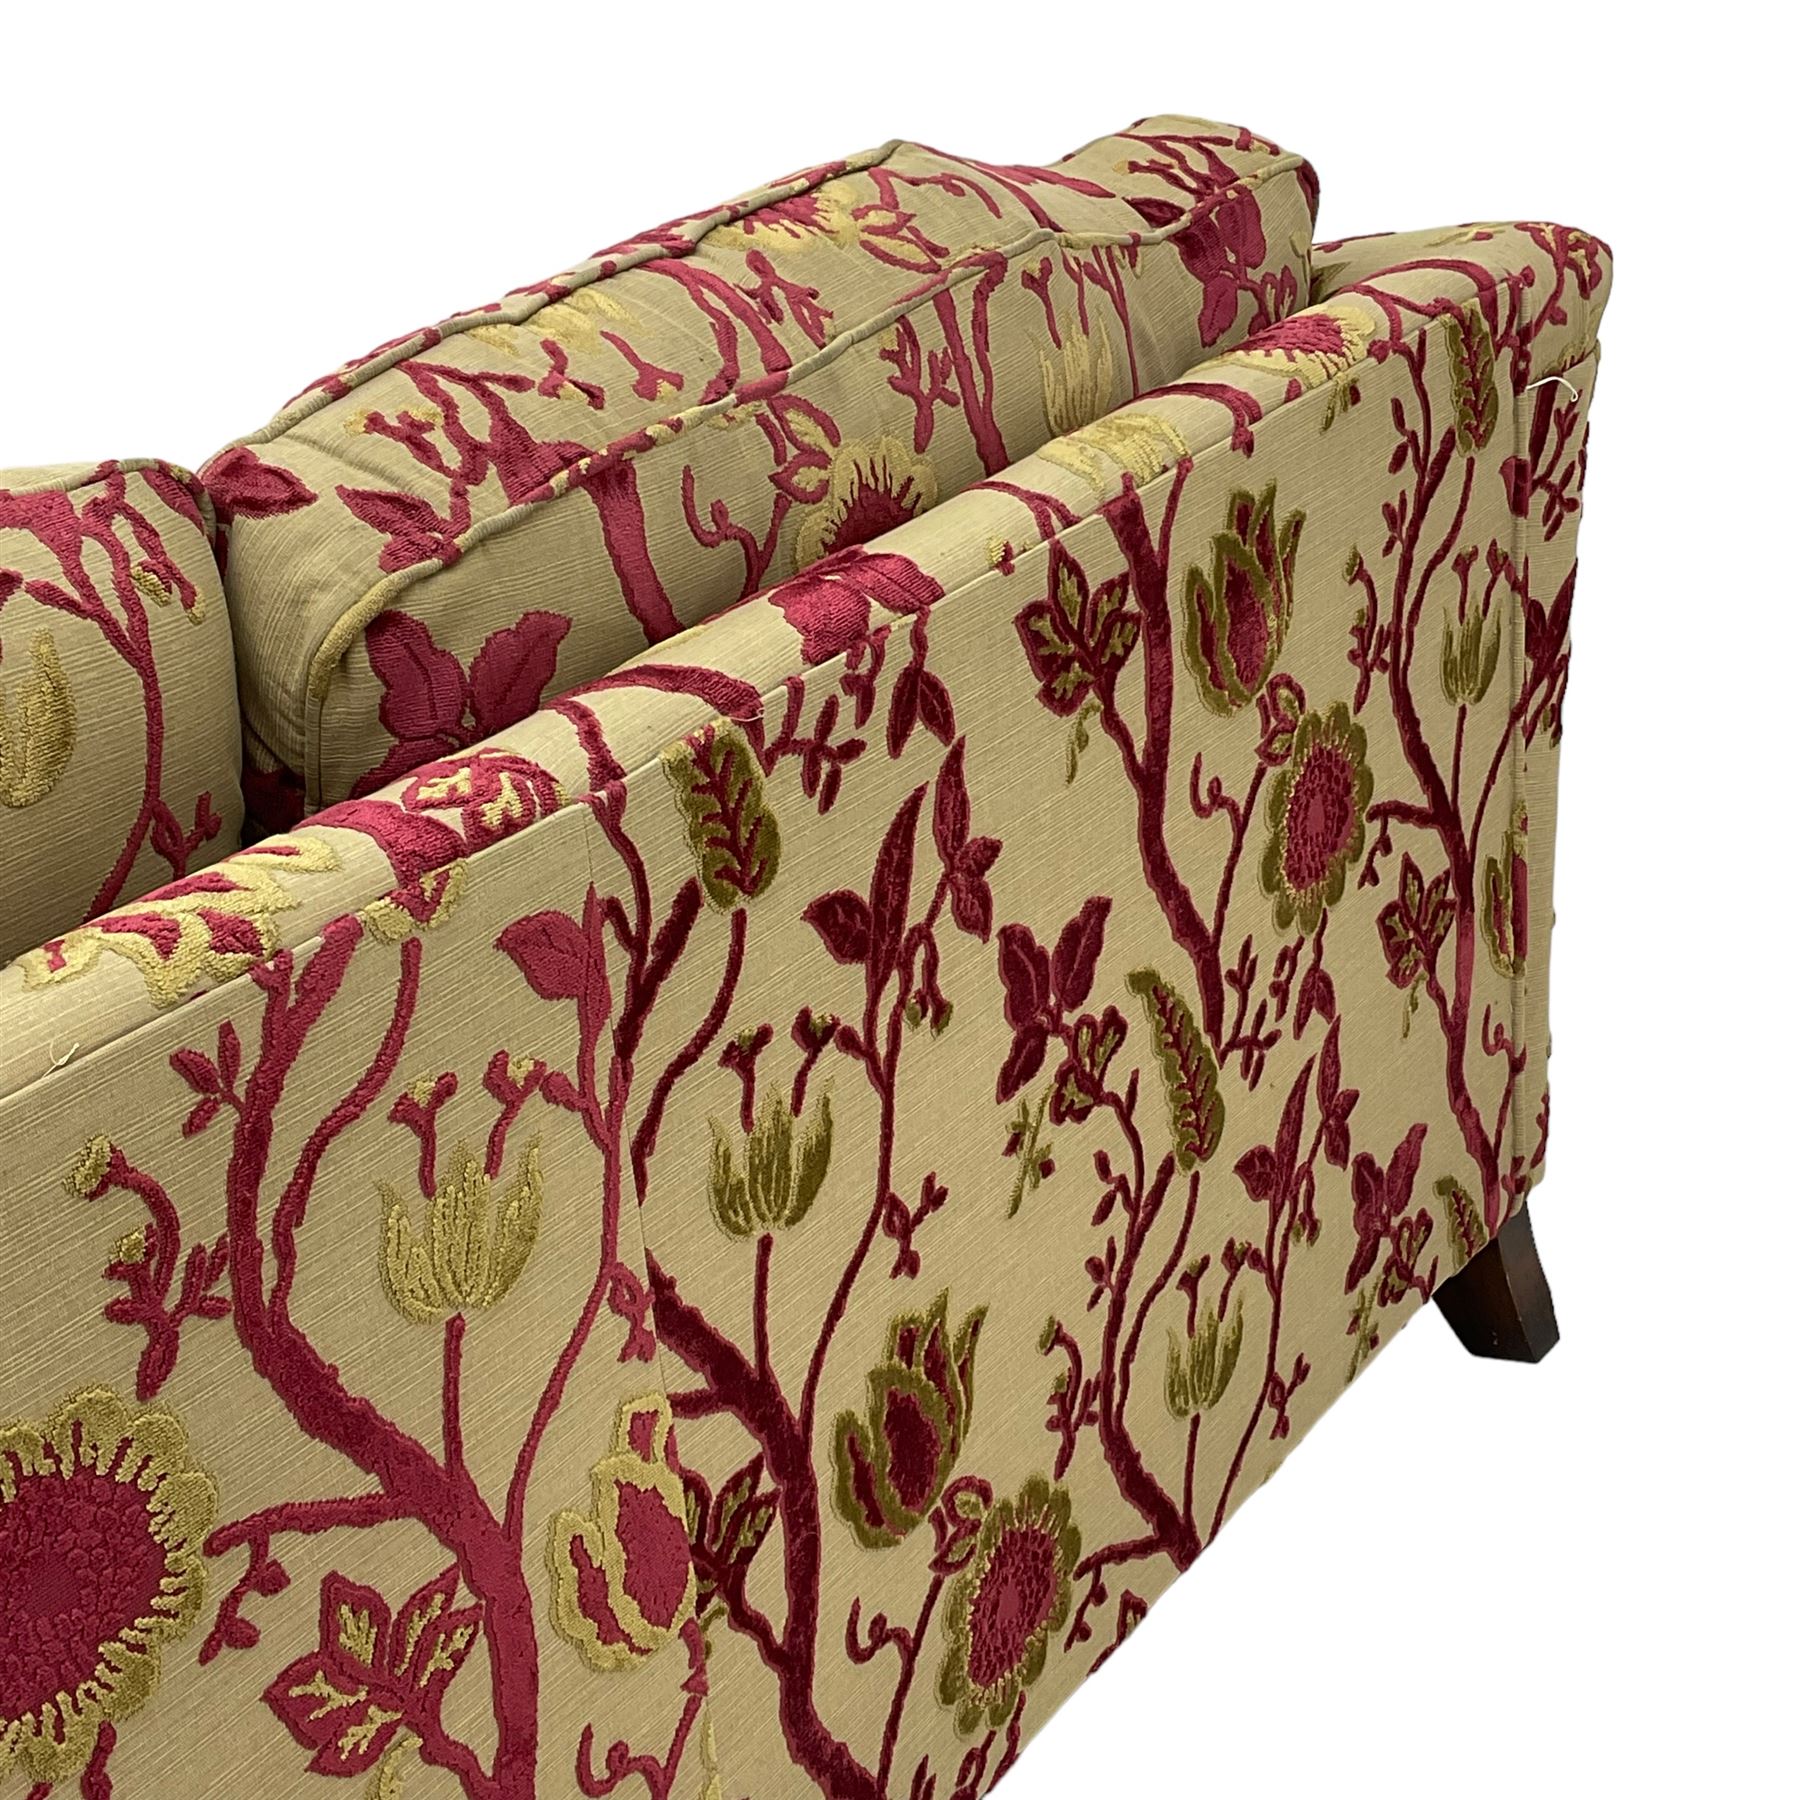 Three-piece lounge suite - large two-seat sofa upholstered in red and gold striped fabric (W185cm - Image 12 of 24